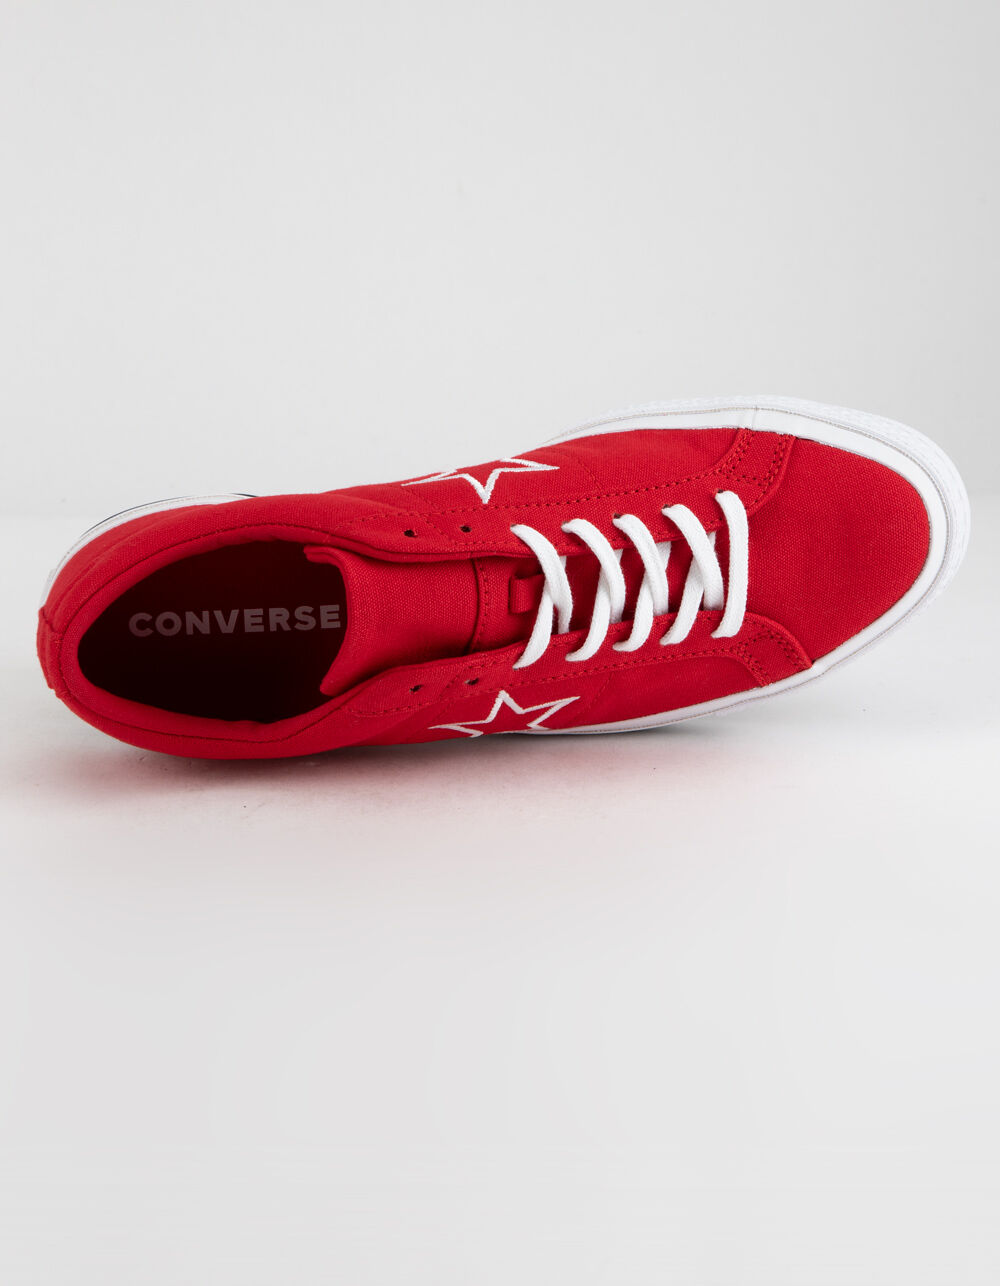 CONVERSE One Star OX Enamel Red & White Low Top Shoes - ENAMEL RED ...